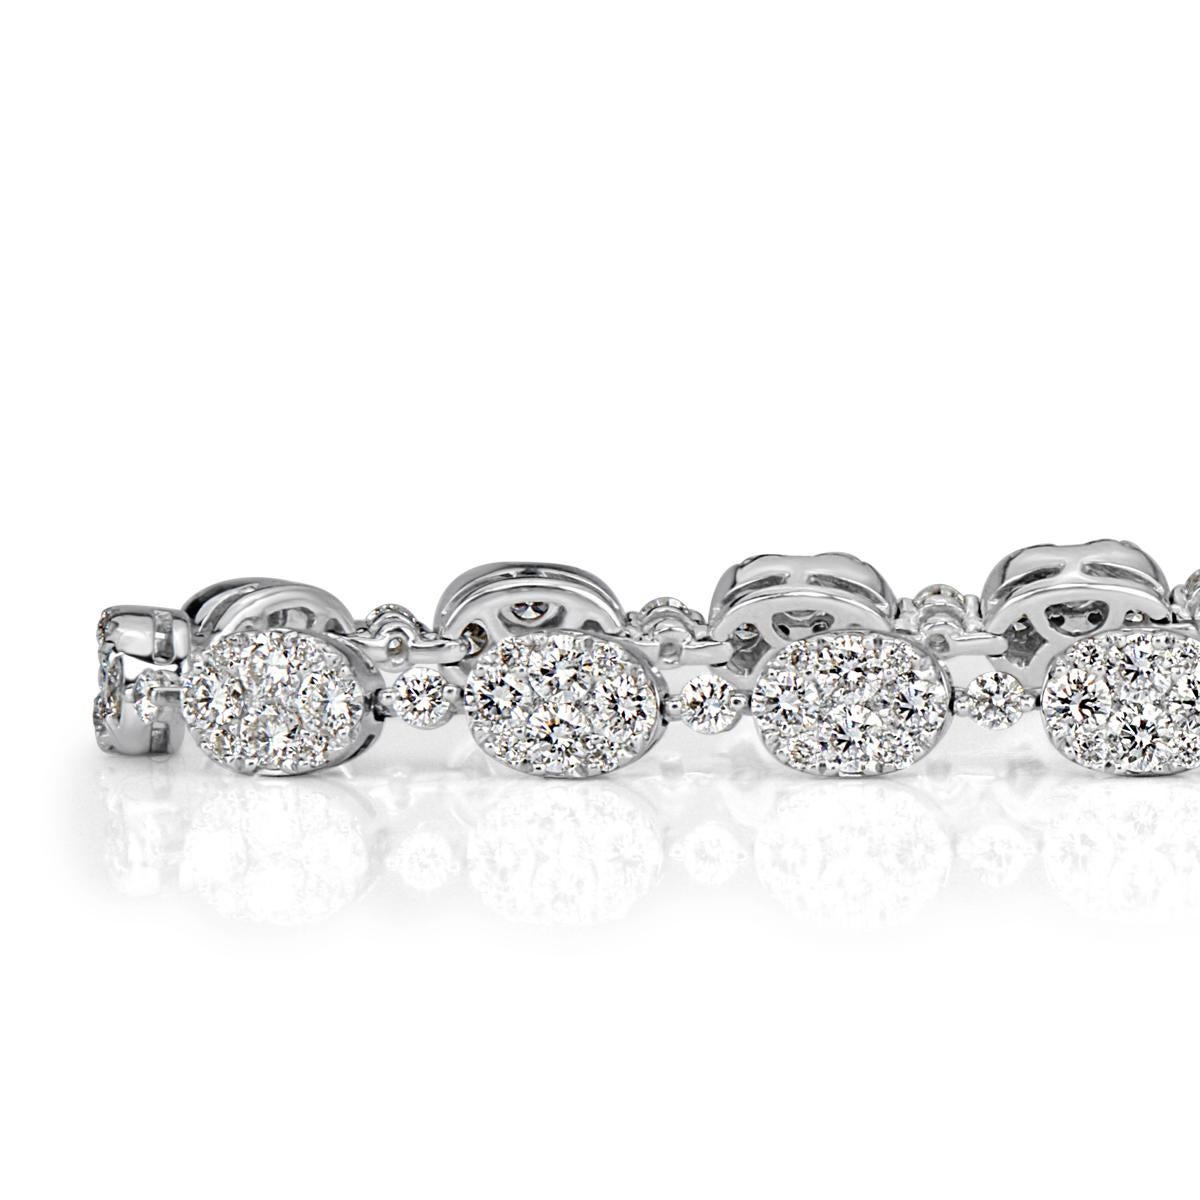 Handcrafted in 14k white gold, this stunning diamond bracelet features 4.11ct of round brilliant cut diamonds hand set in a lovely oval shaped design. The diamonds are  graded at F-G in color, VS1-VS2 in clarity.
